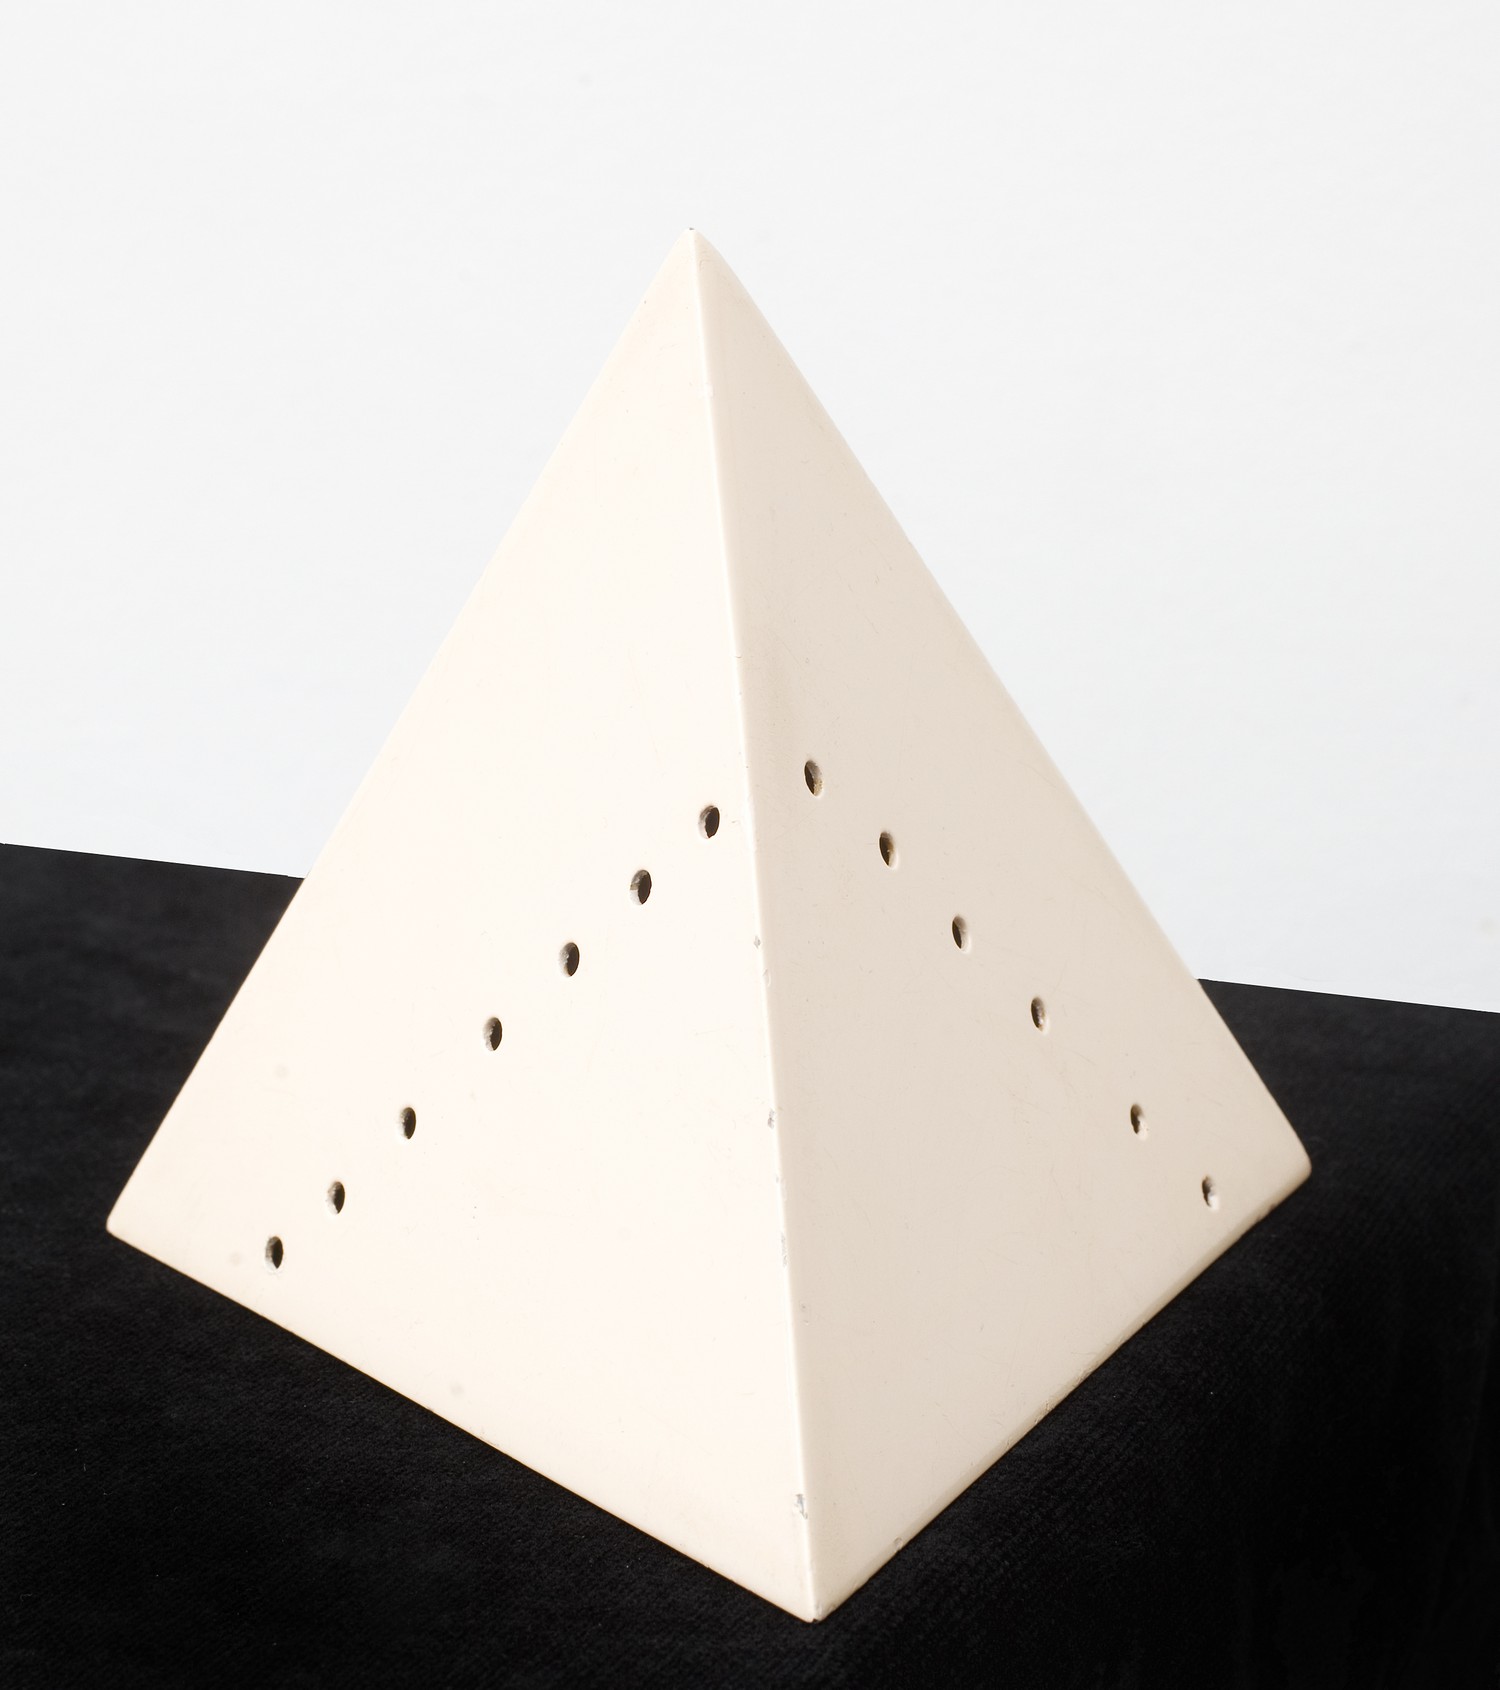  Lucio Fontana,  Piramide , c.1967, Metal, pink lacquer, 11 x 13 x 13 cm, Numbered and signed 30/50 as well as L. Fontana. Edition 30/50 